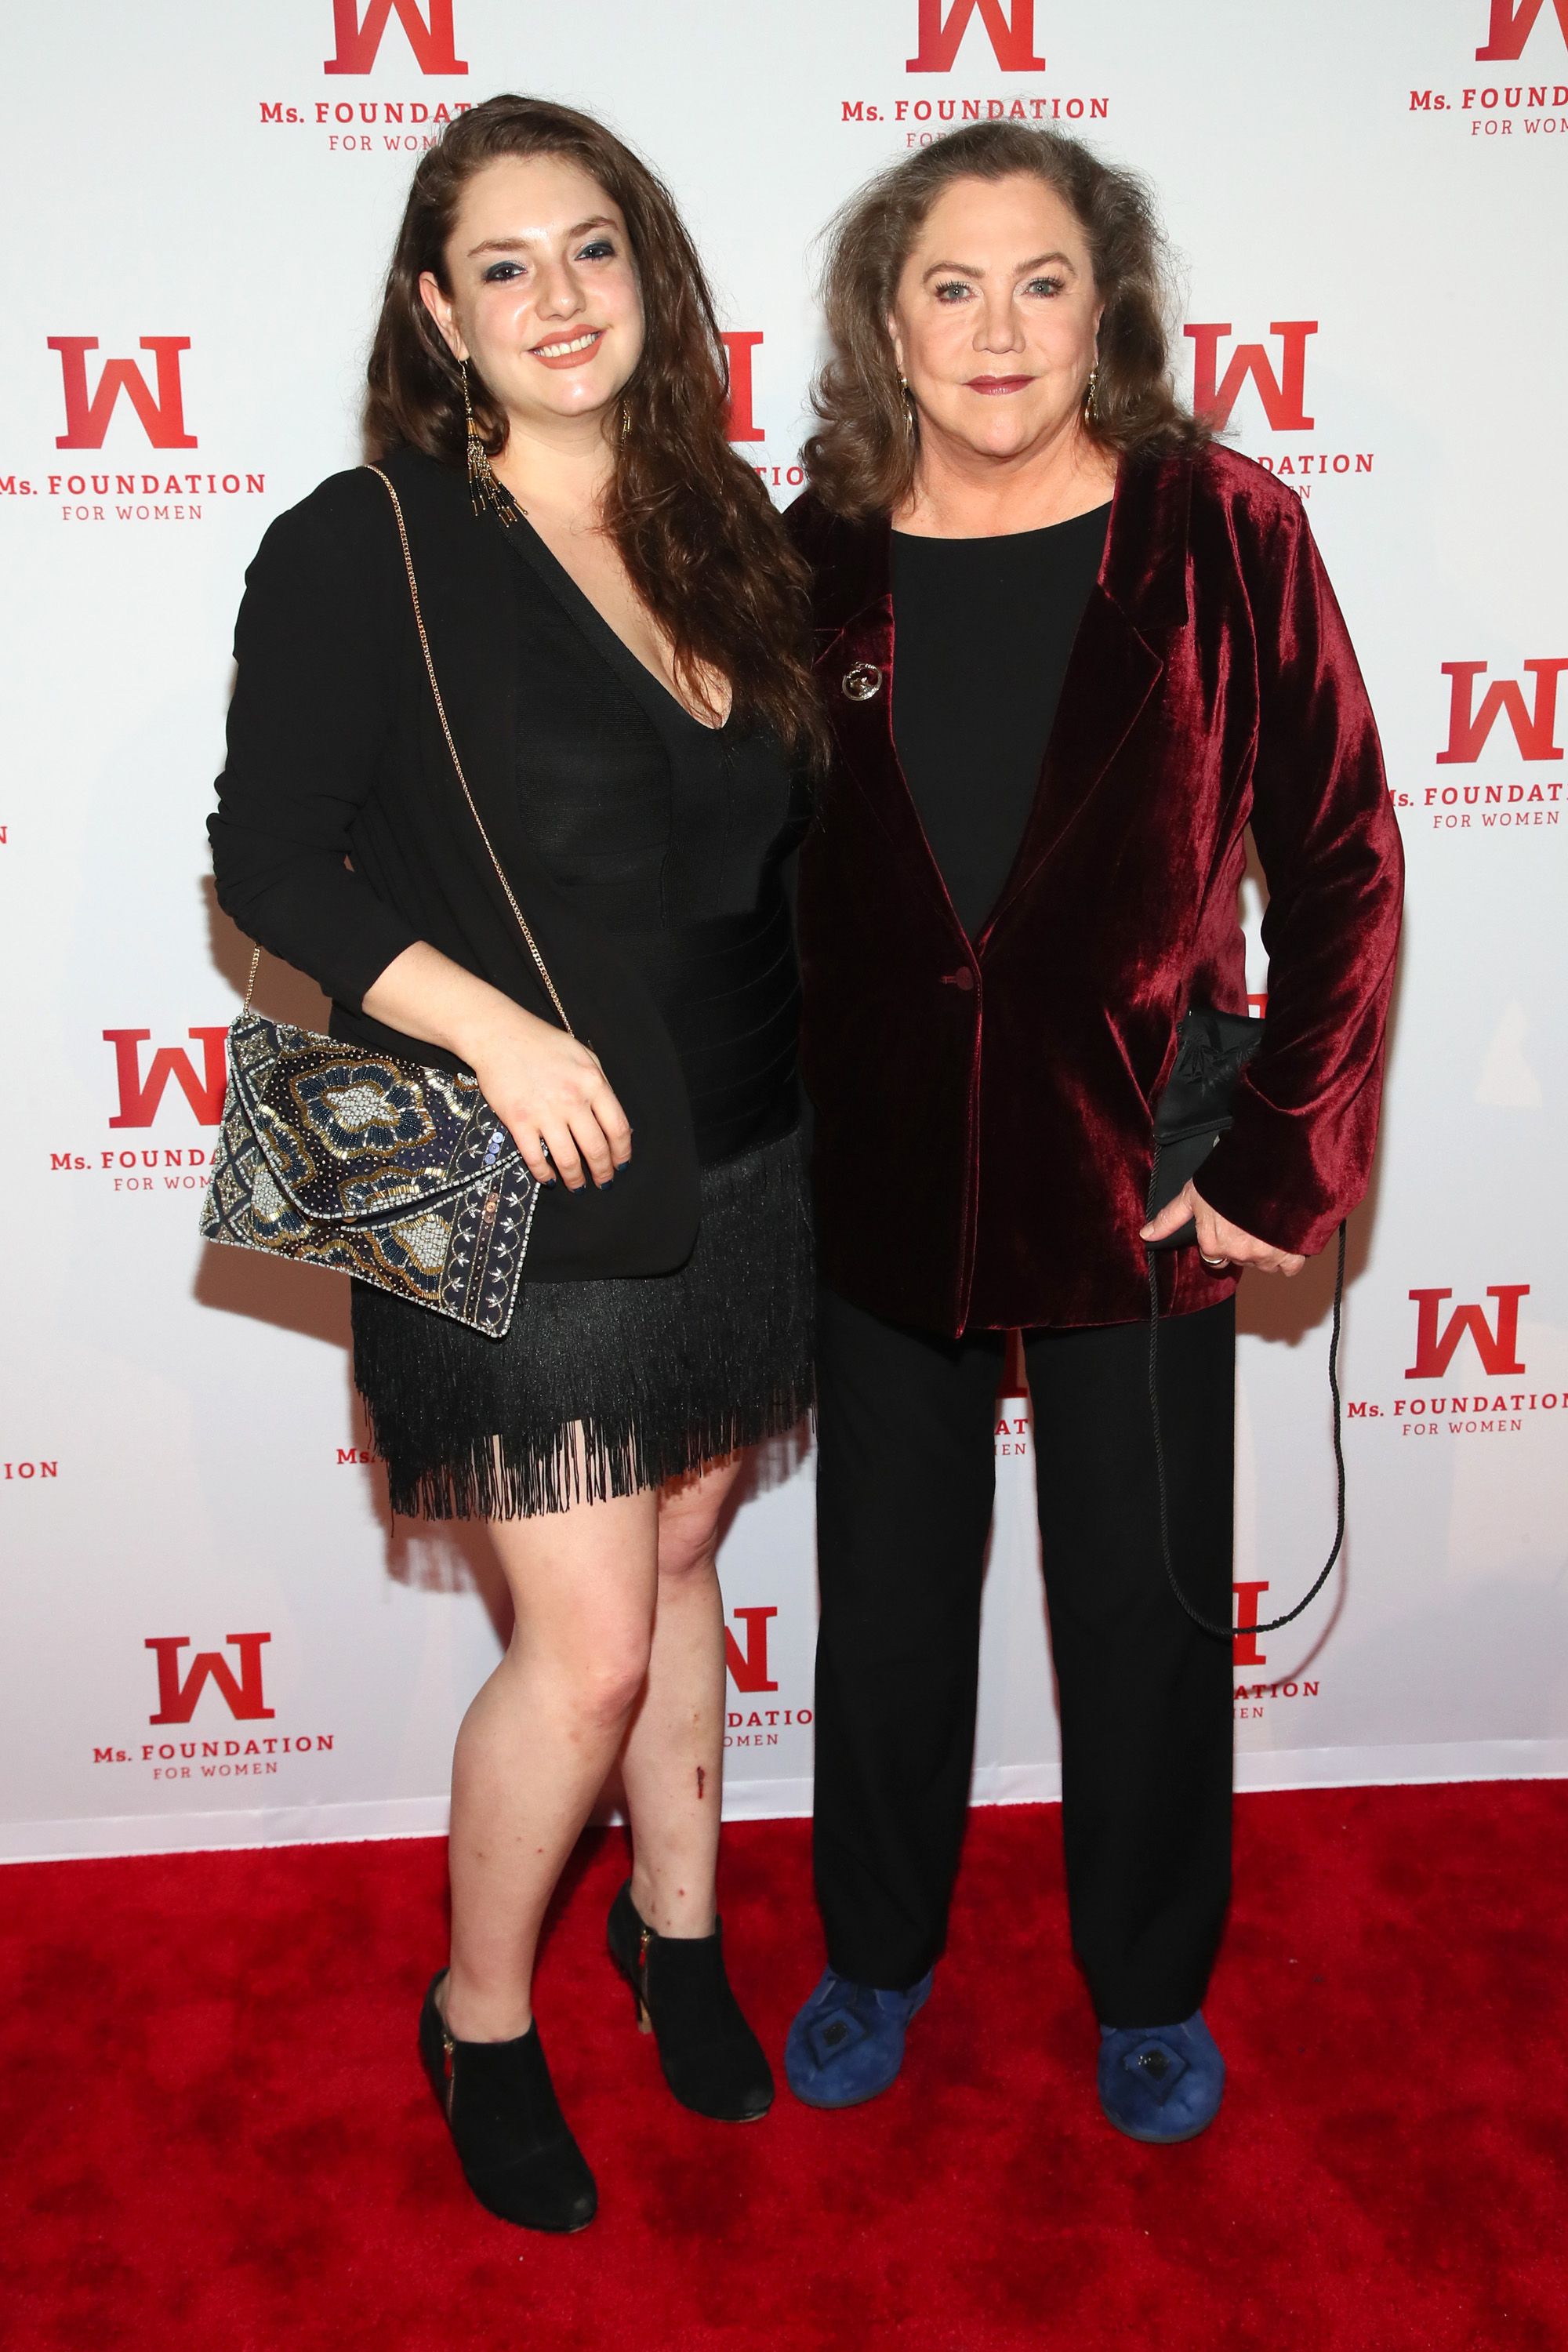 Rachel Weiss and Kathleen Turner attend the Ms. Foundation For Women's Annual Gloria Awards at Capitale on May 8, 2019 in New York City. | Sources: Getty Images